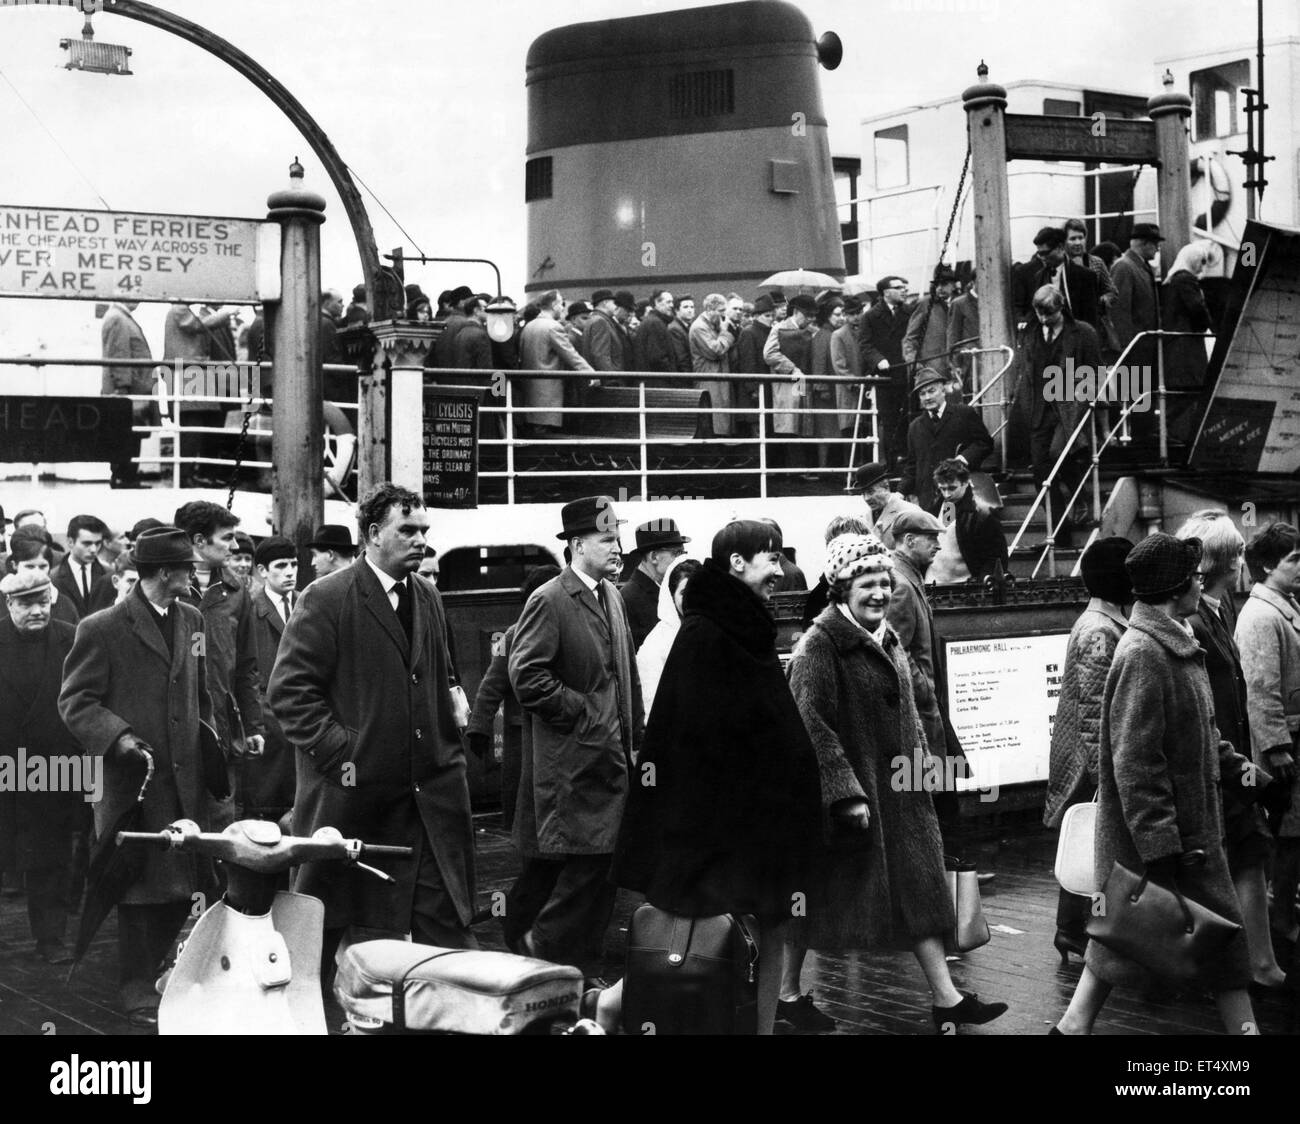 Crowded ferry boats operated a faster than usual shuttle service from Birkenhead, Merseyside, to cope with increased traffic. Circa 1960s. Stock Photo